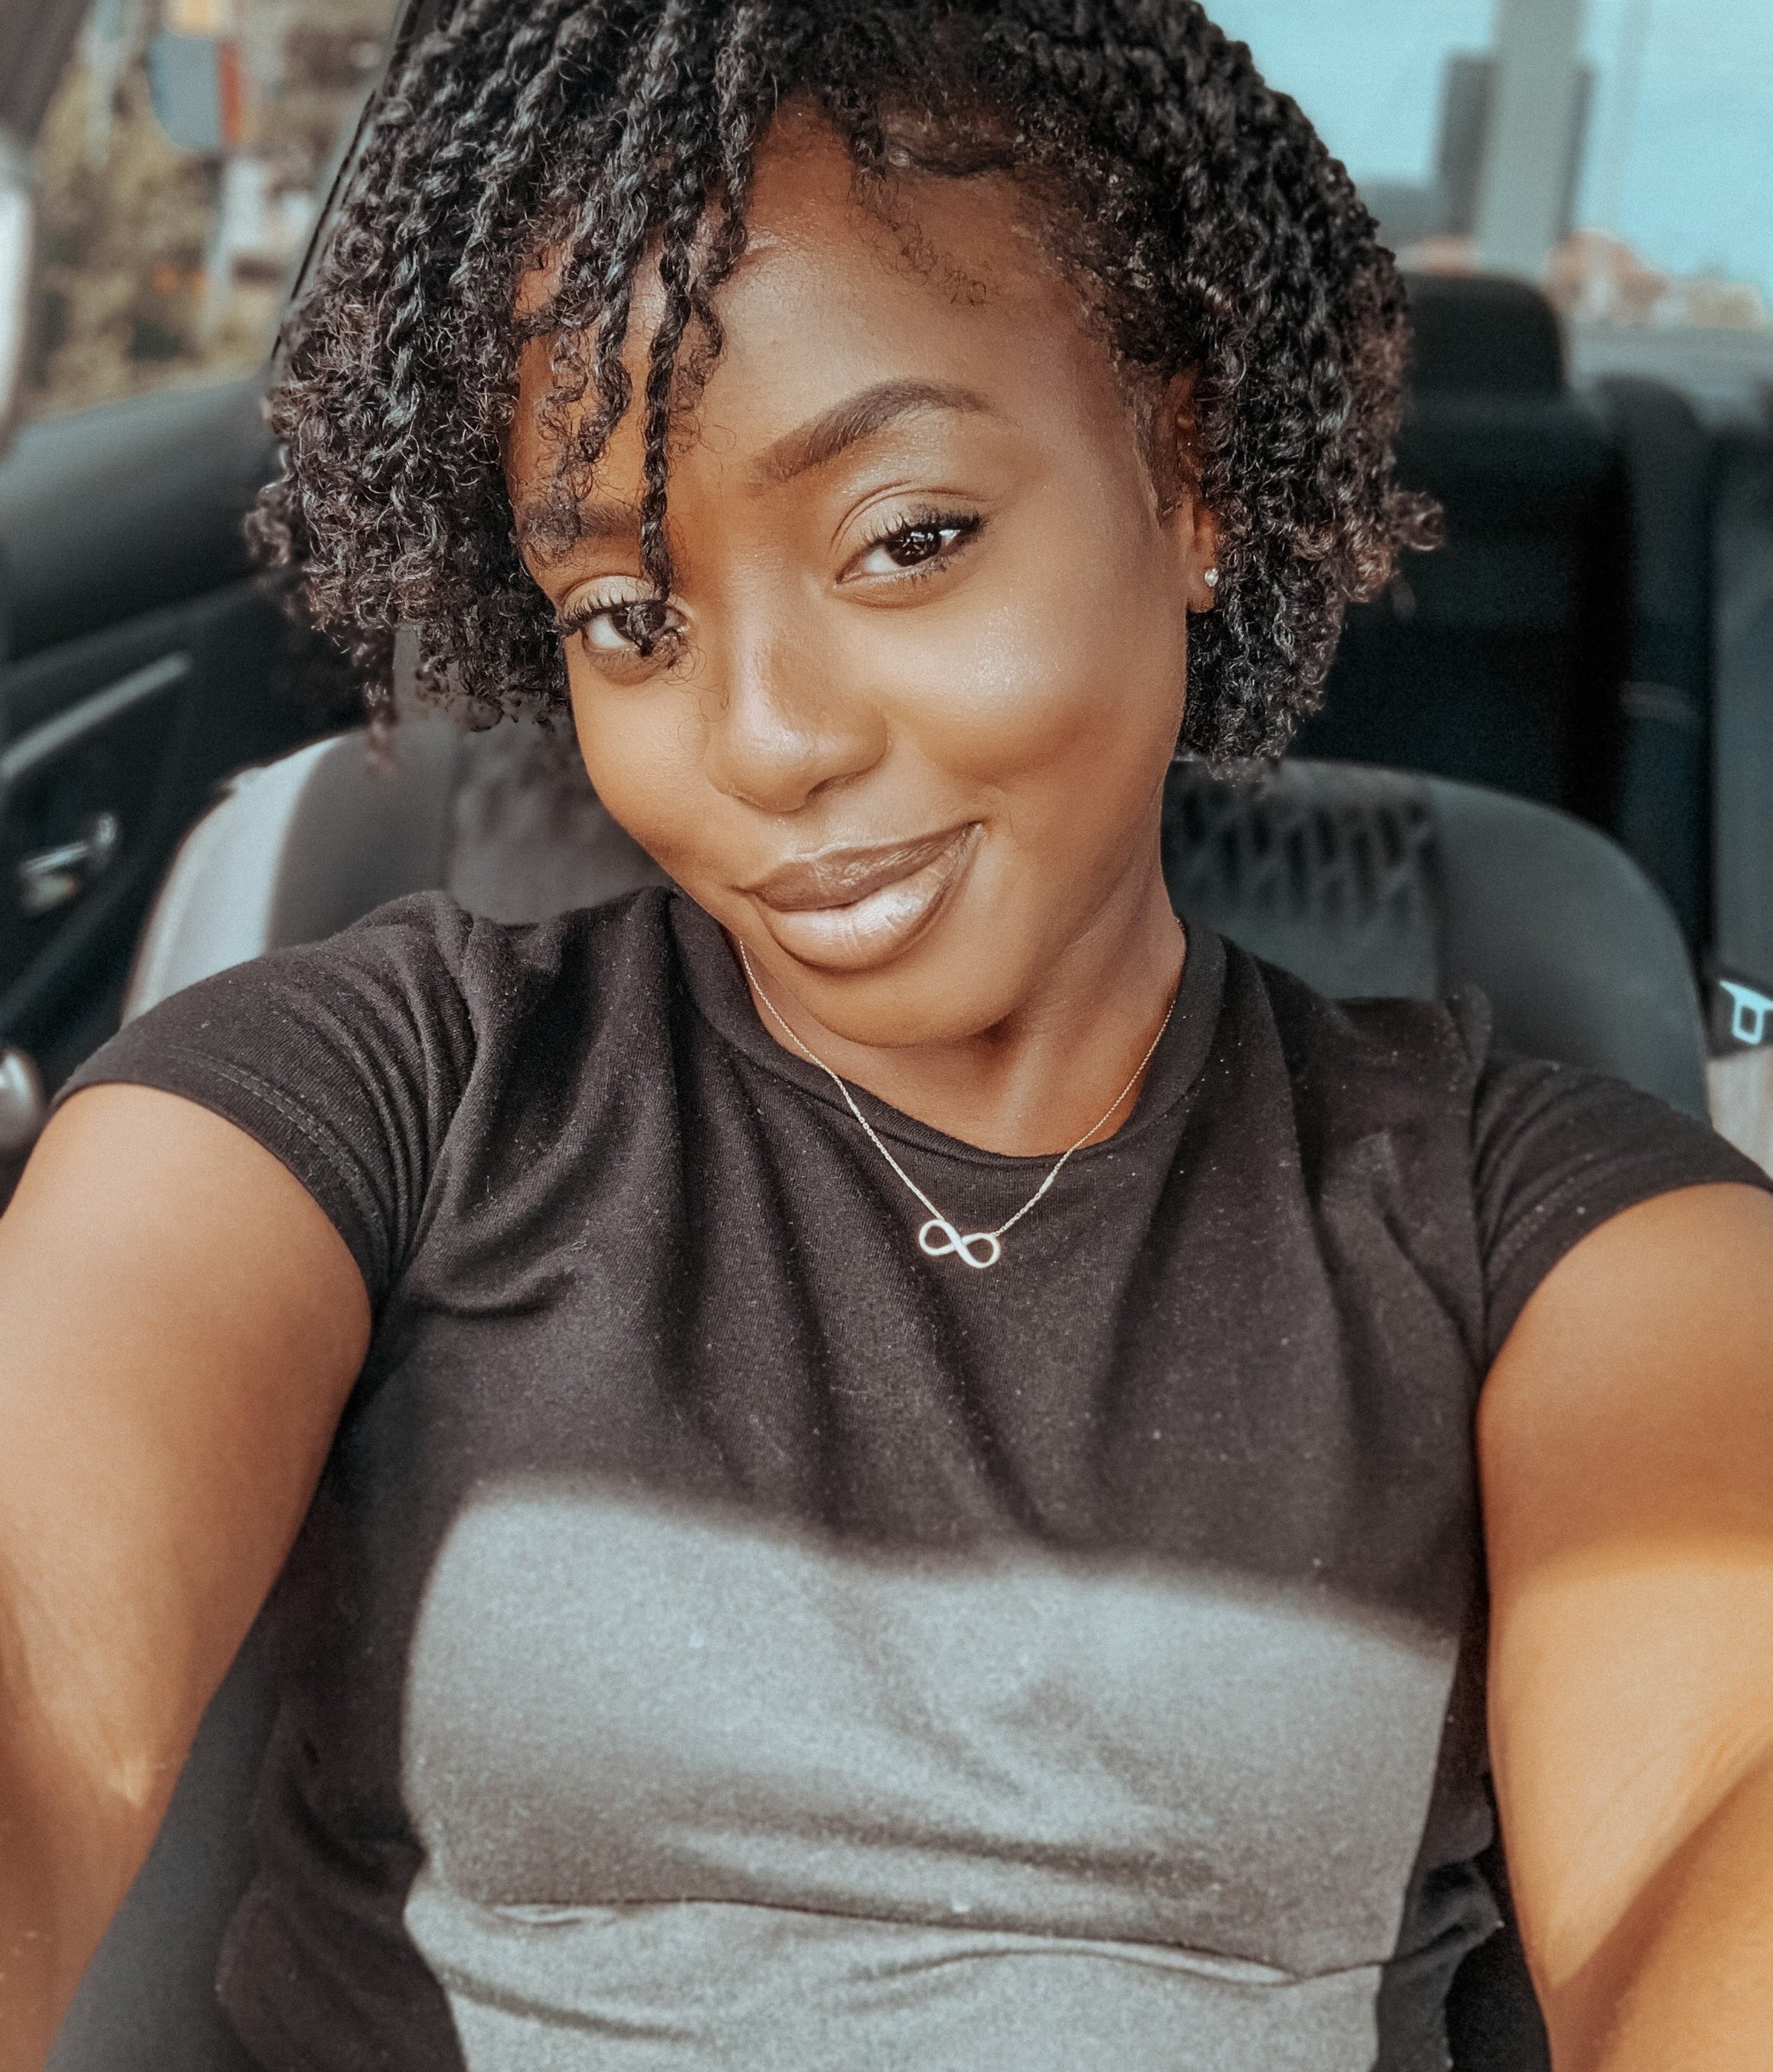 Mini Twists: How to Create the Protective Style On Any Hair Length